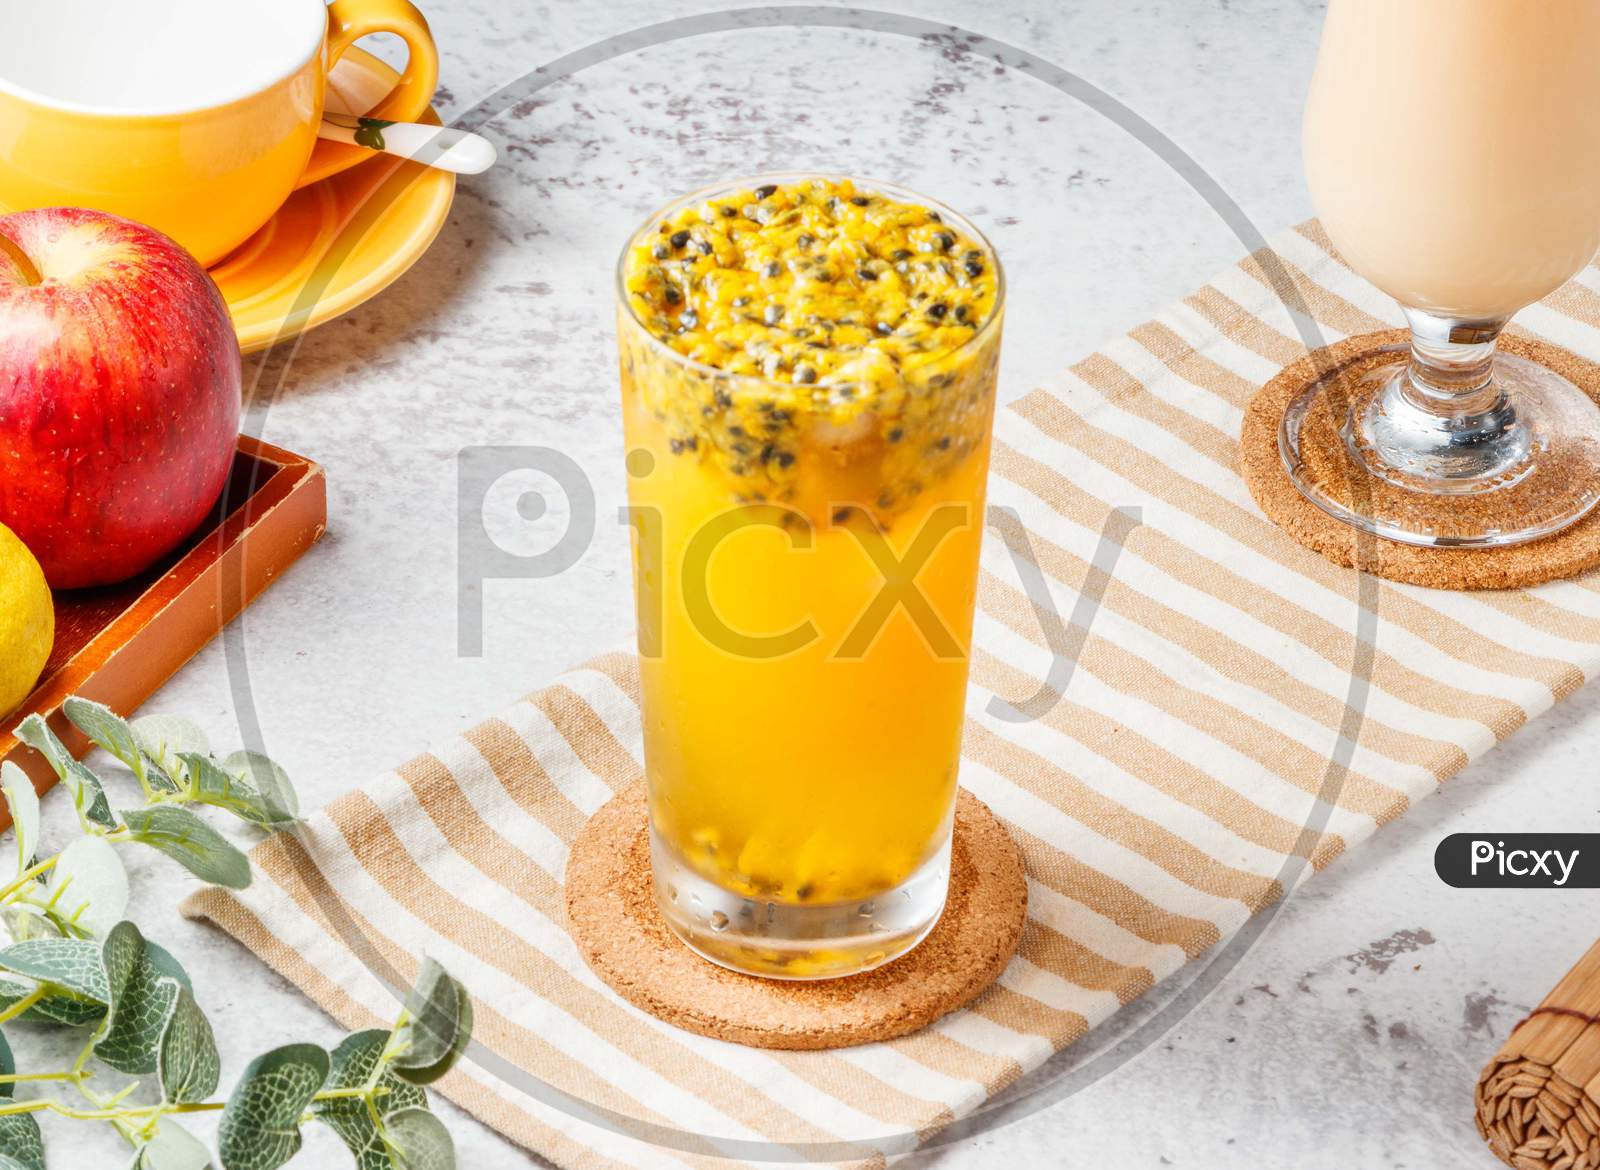 Iced Passion Fruit Green Tea Isolated On Mat And White Background. Healthy Drinks Concept